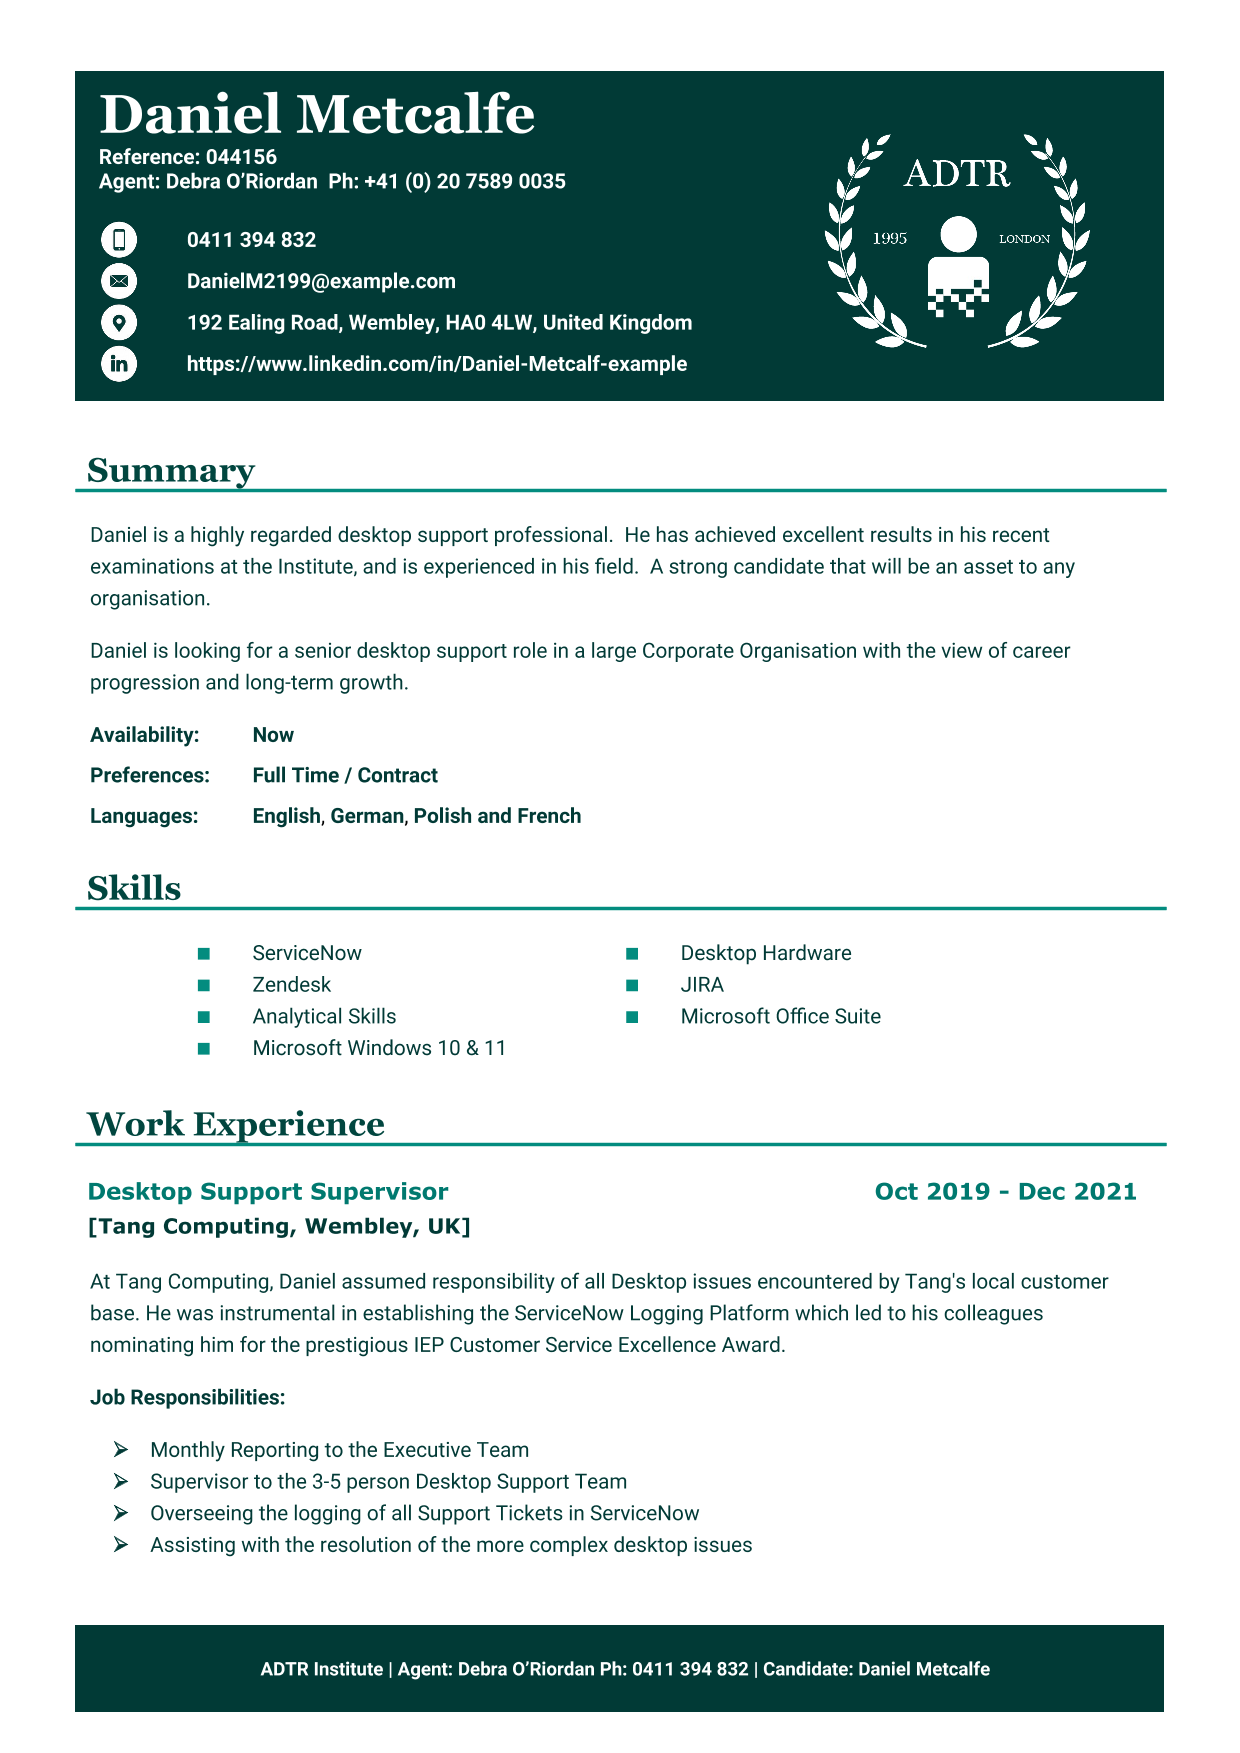 Candidate Resume